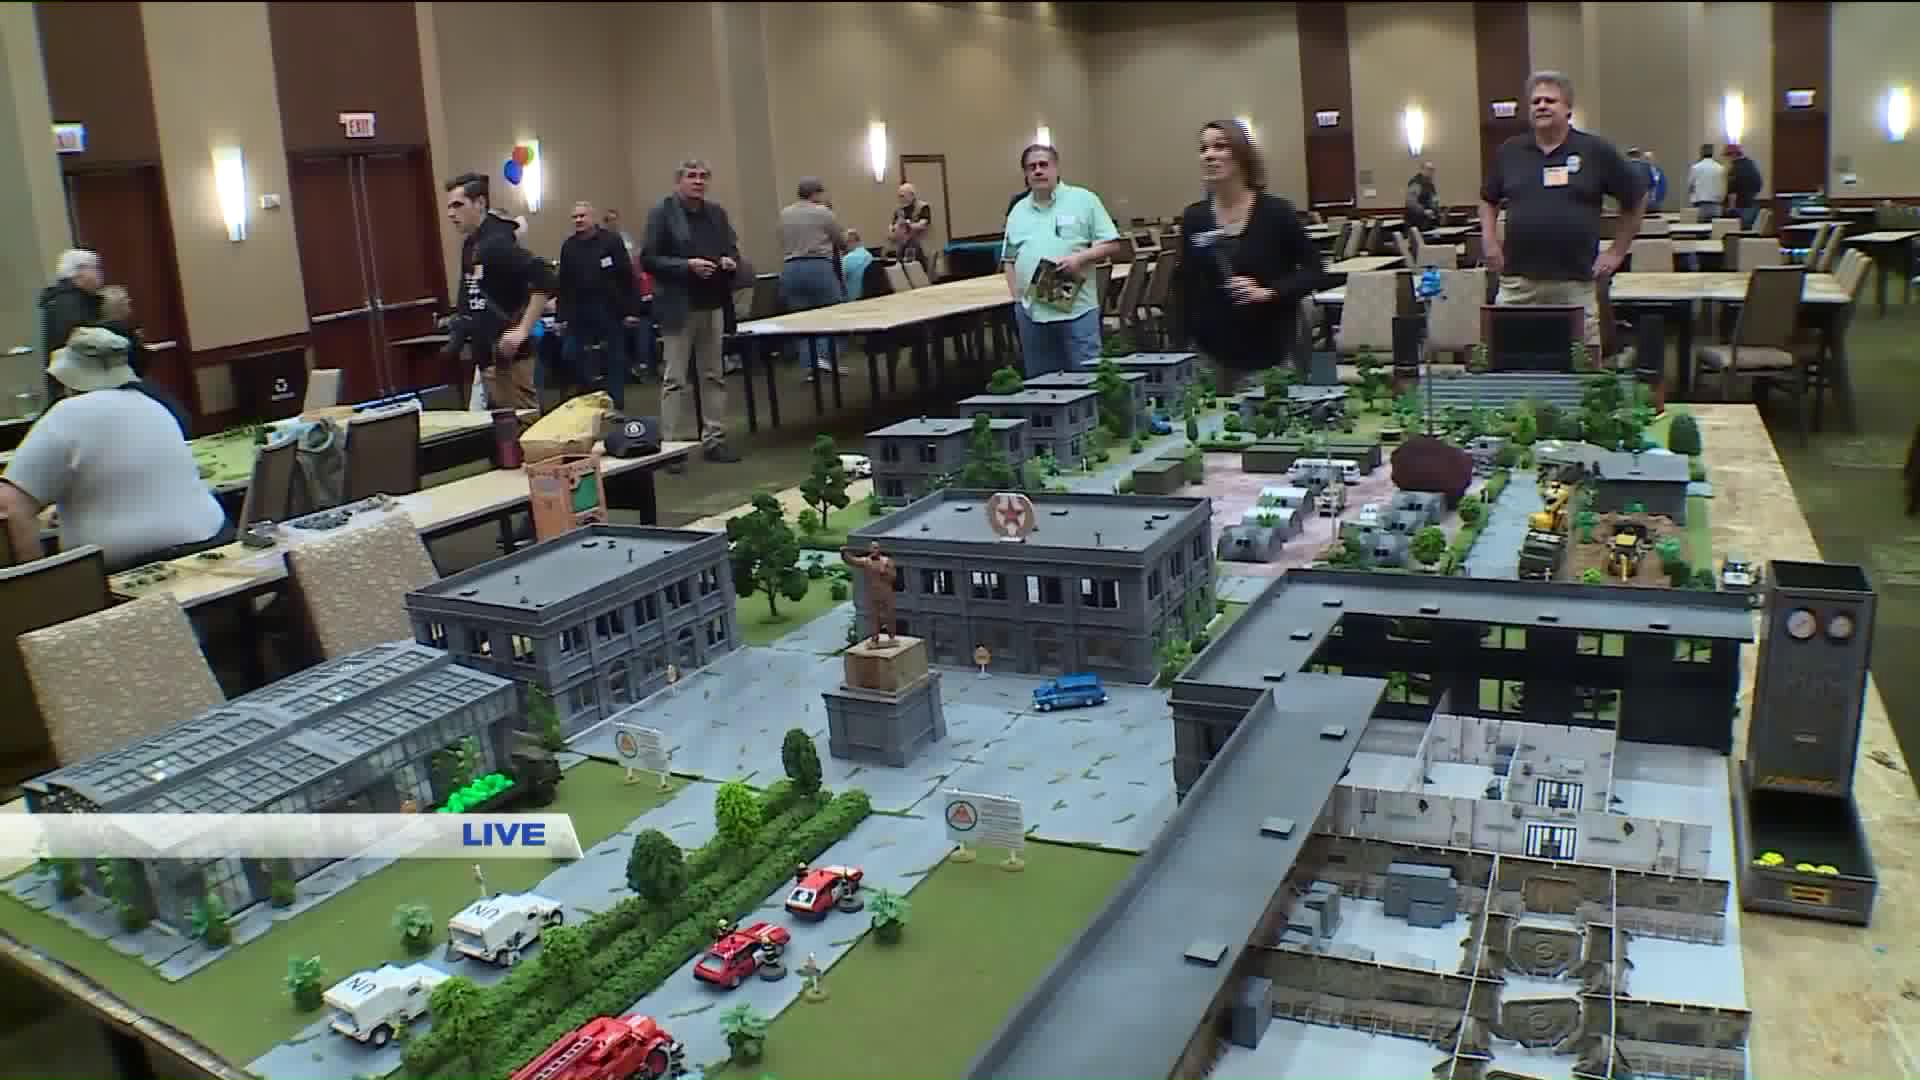 Around Town checks out the Little Wars Gaming Convention